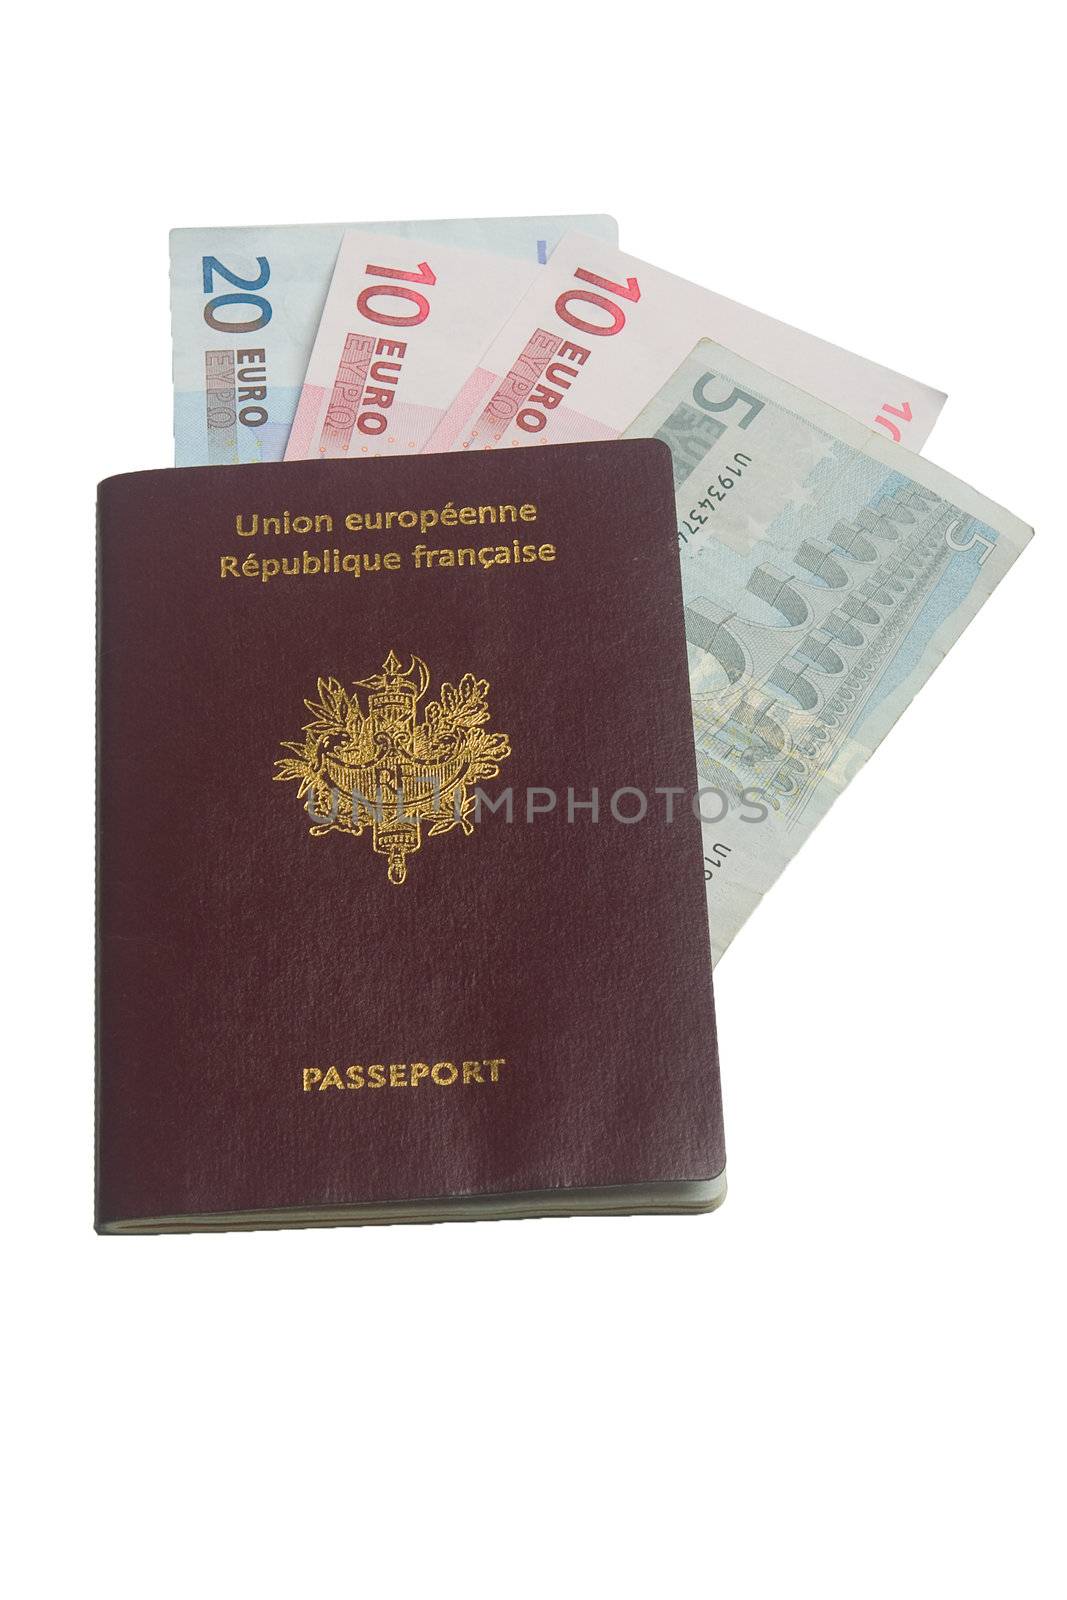 French passport with euros by PPphoto